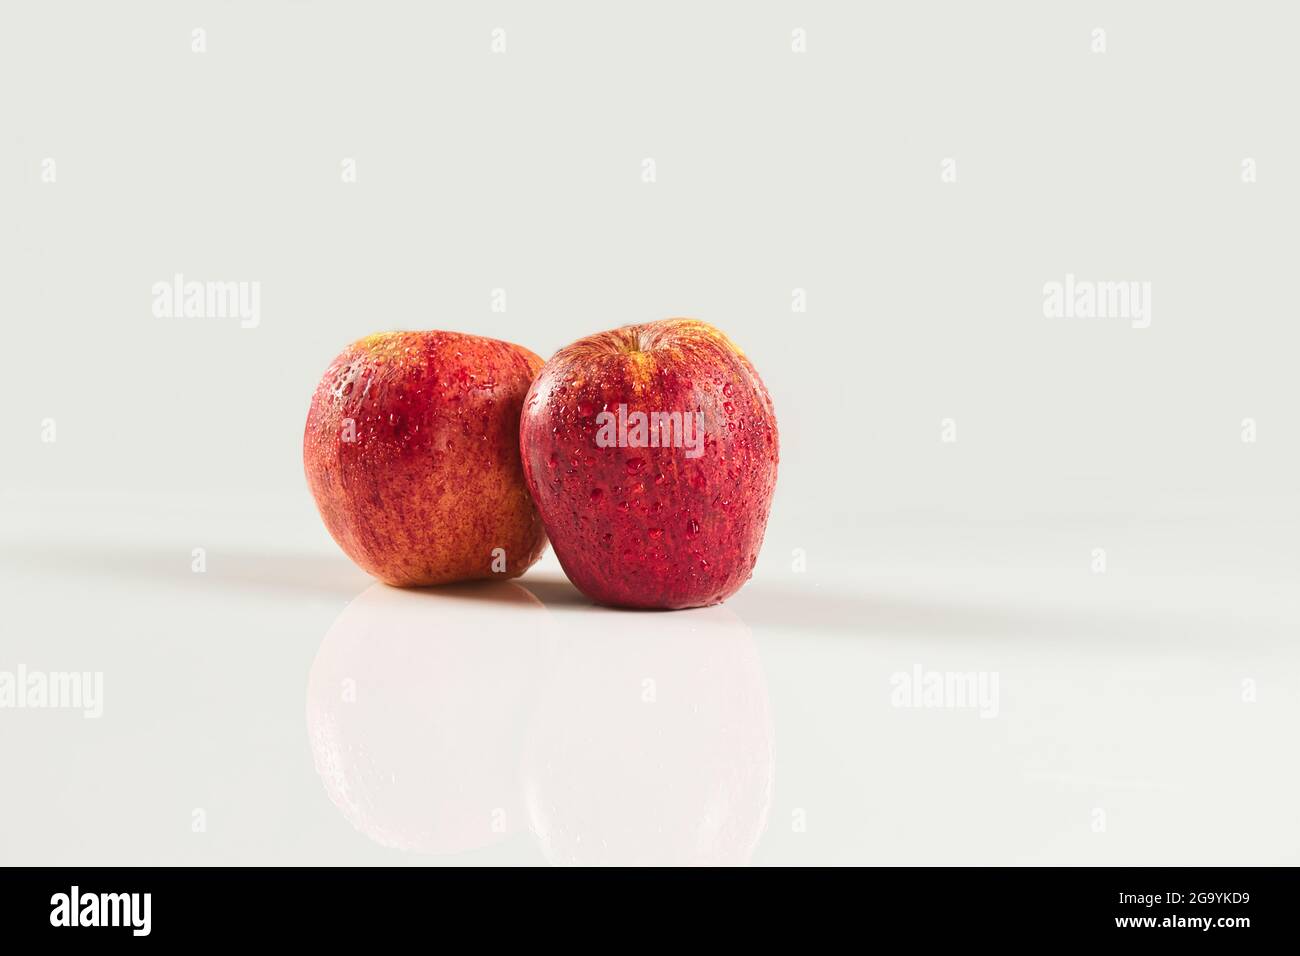 foreground of two red apples with drops on white background Stock Photo